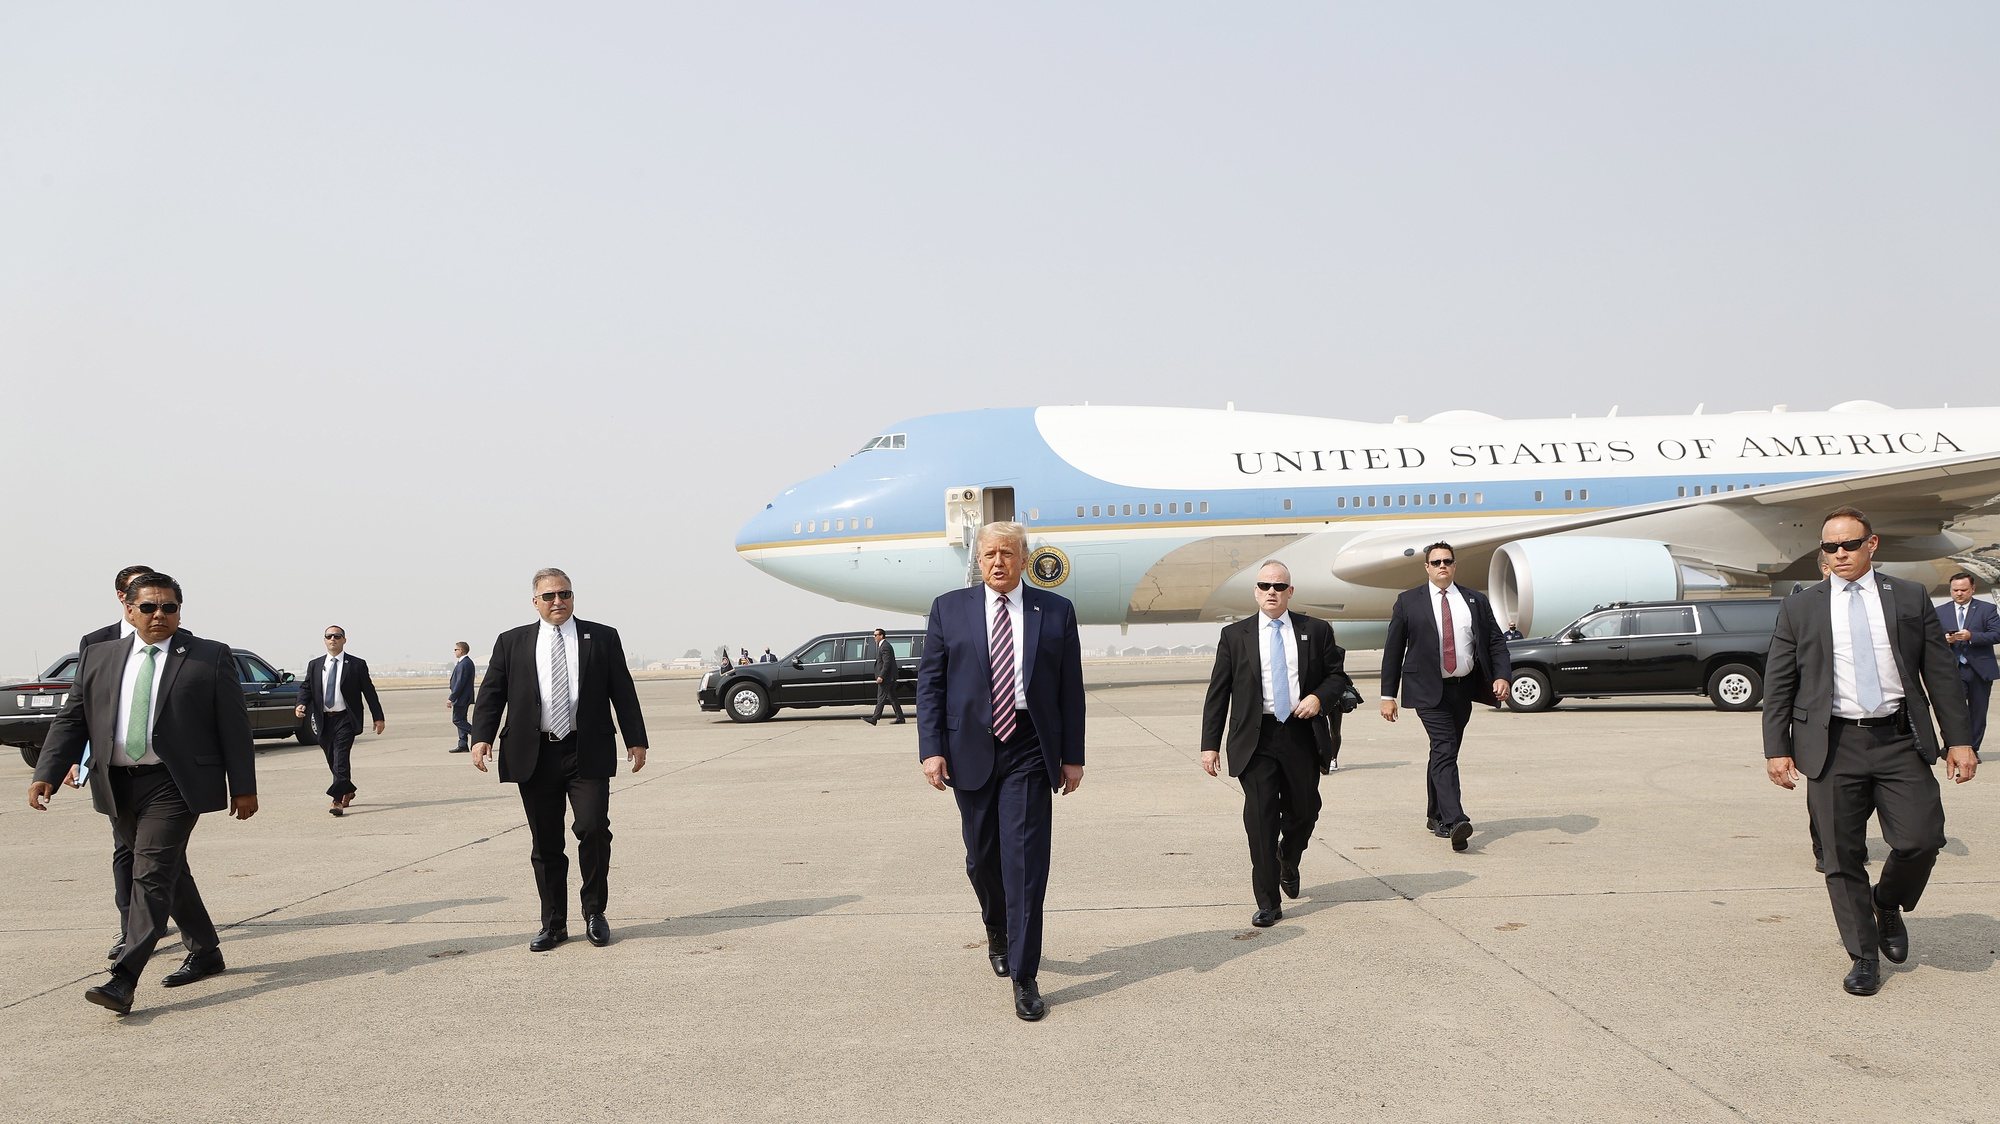 epa08939649 (FILE) US President Donald J. Trump (C) walks towards the media platform surrounded by his secret service detail after arriving on Air Force One at Sacramento McClellan Airport in McClelland Park, California, USA, 14 September 2020. The President visited Sacramento County to be briefed on the deadly wildfires that have burned more than three million acres across California. The presidency of Donald Trump, which records two presidential impeachments, will end at noon on 20 January 2021.  EPA/JOHN G. MABANGLO *** Local Caption *** 56342653